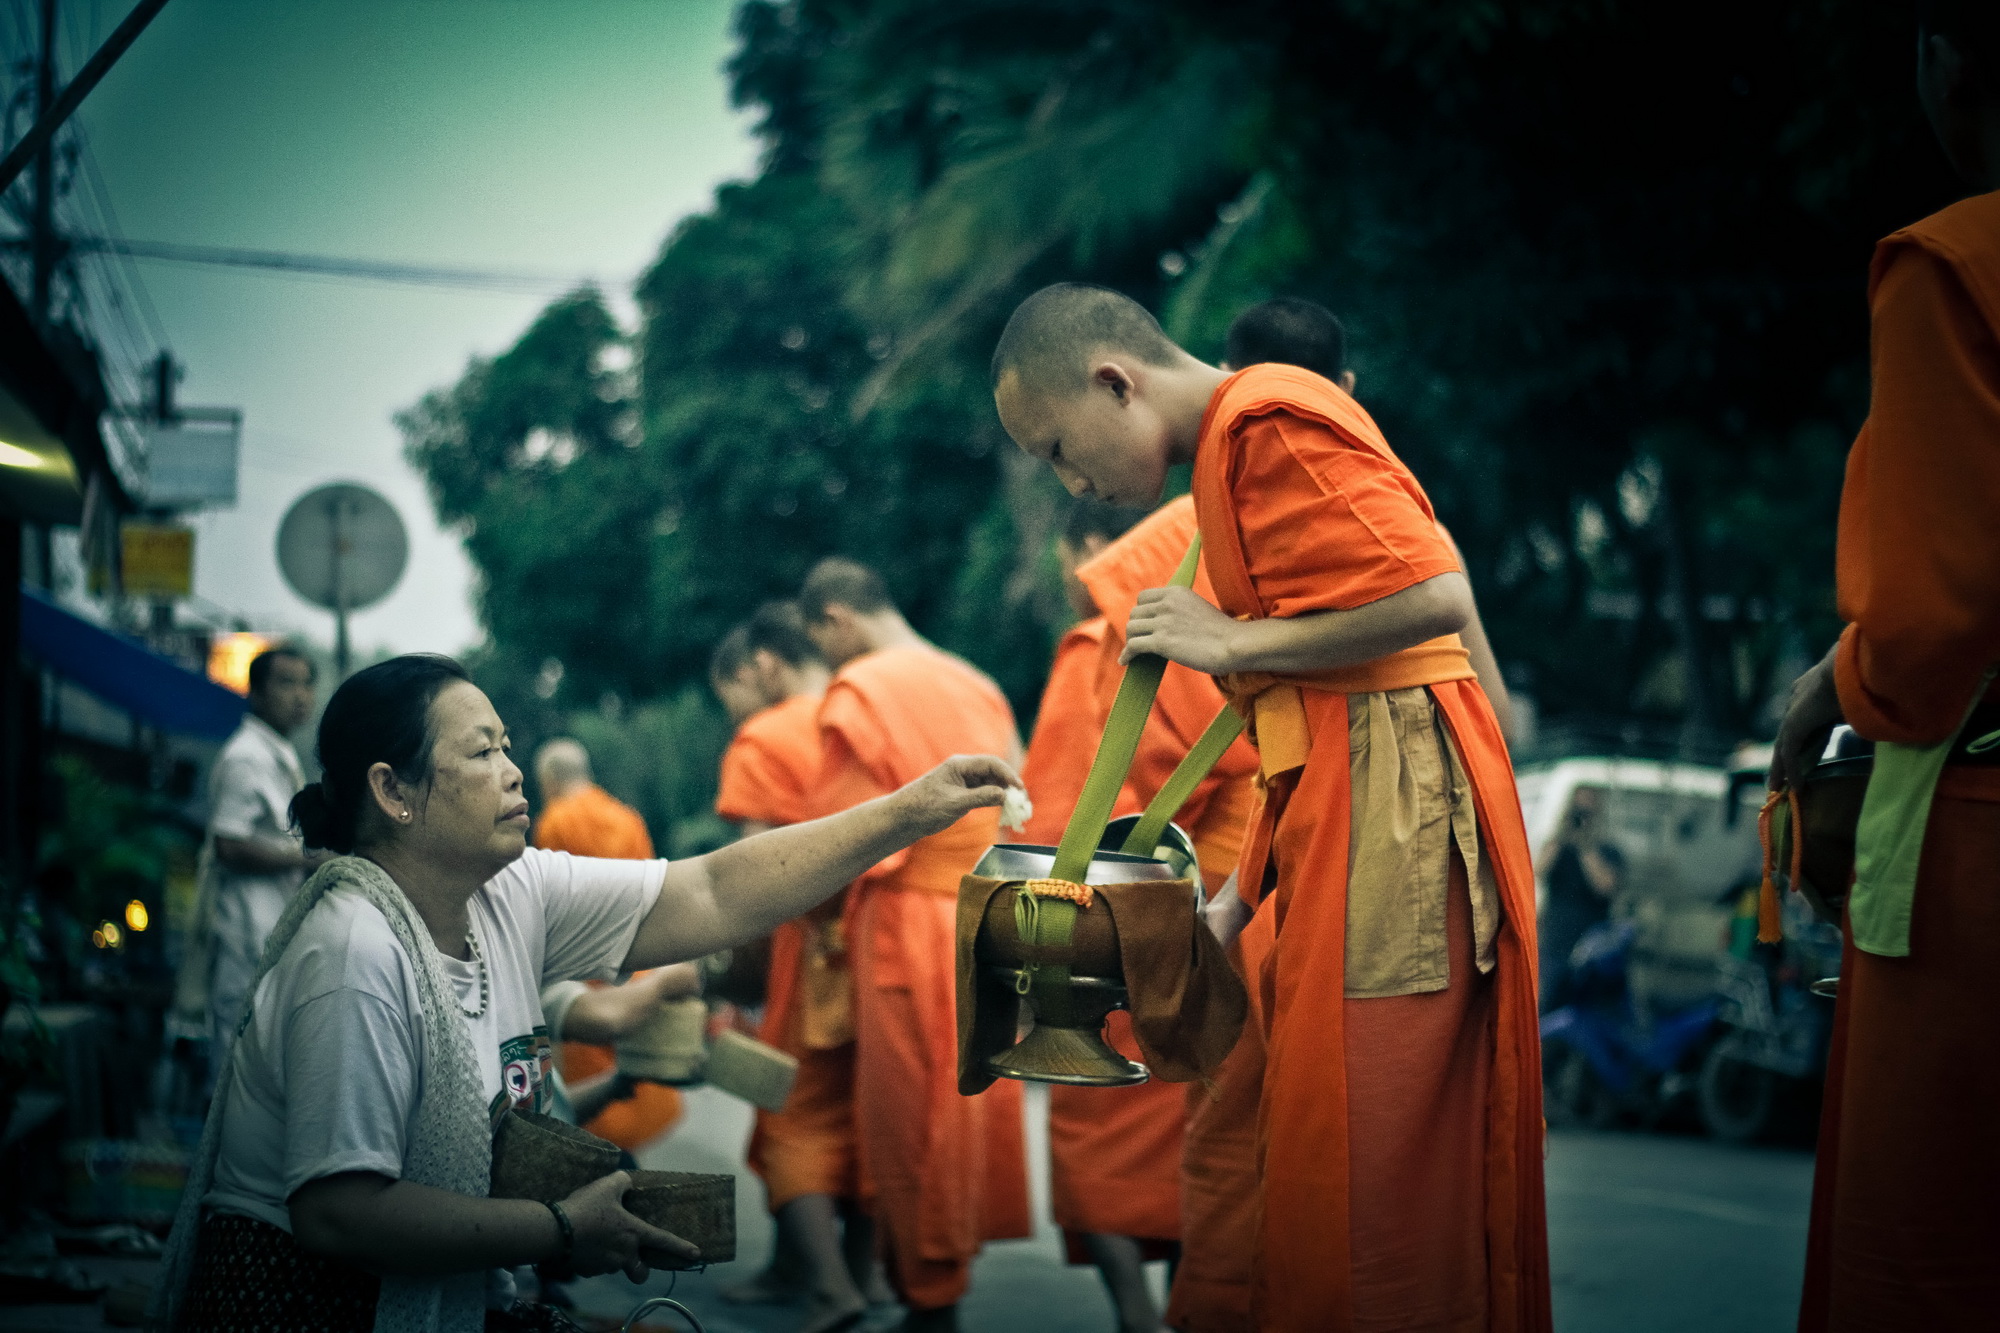 Giving of Alms to Monks in Luang Prabang